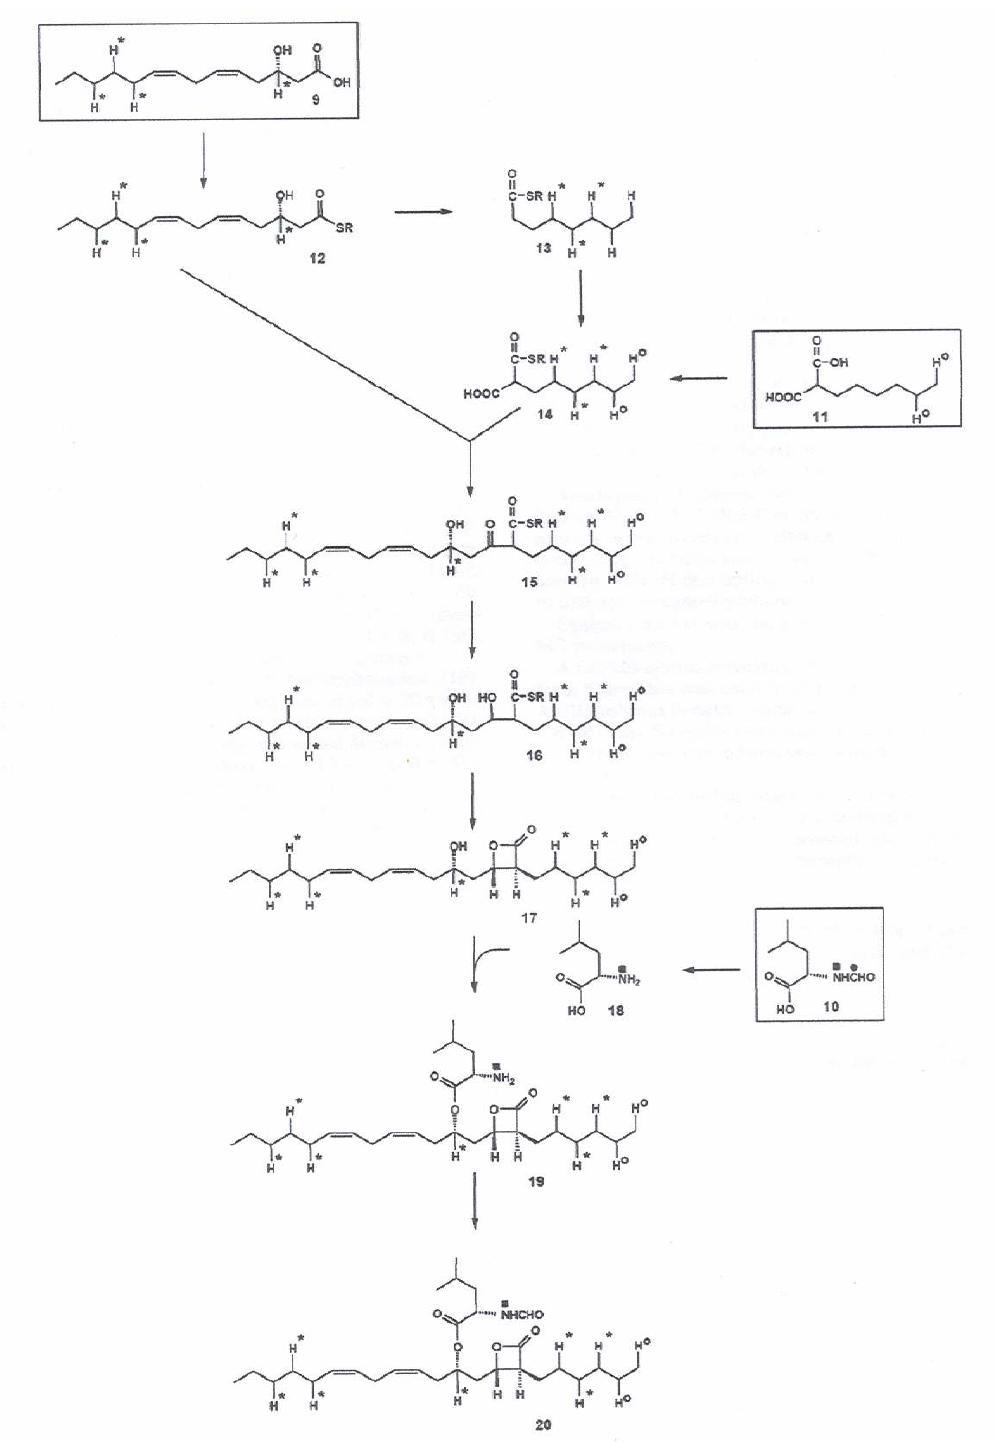 Biosynthetic pathway of lipstatin in Streptomyces toxytricini